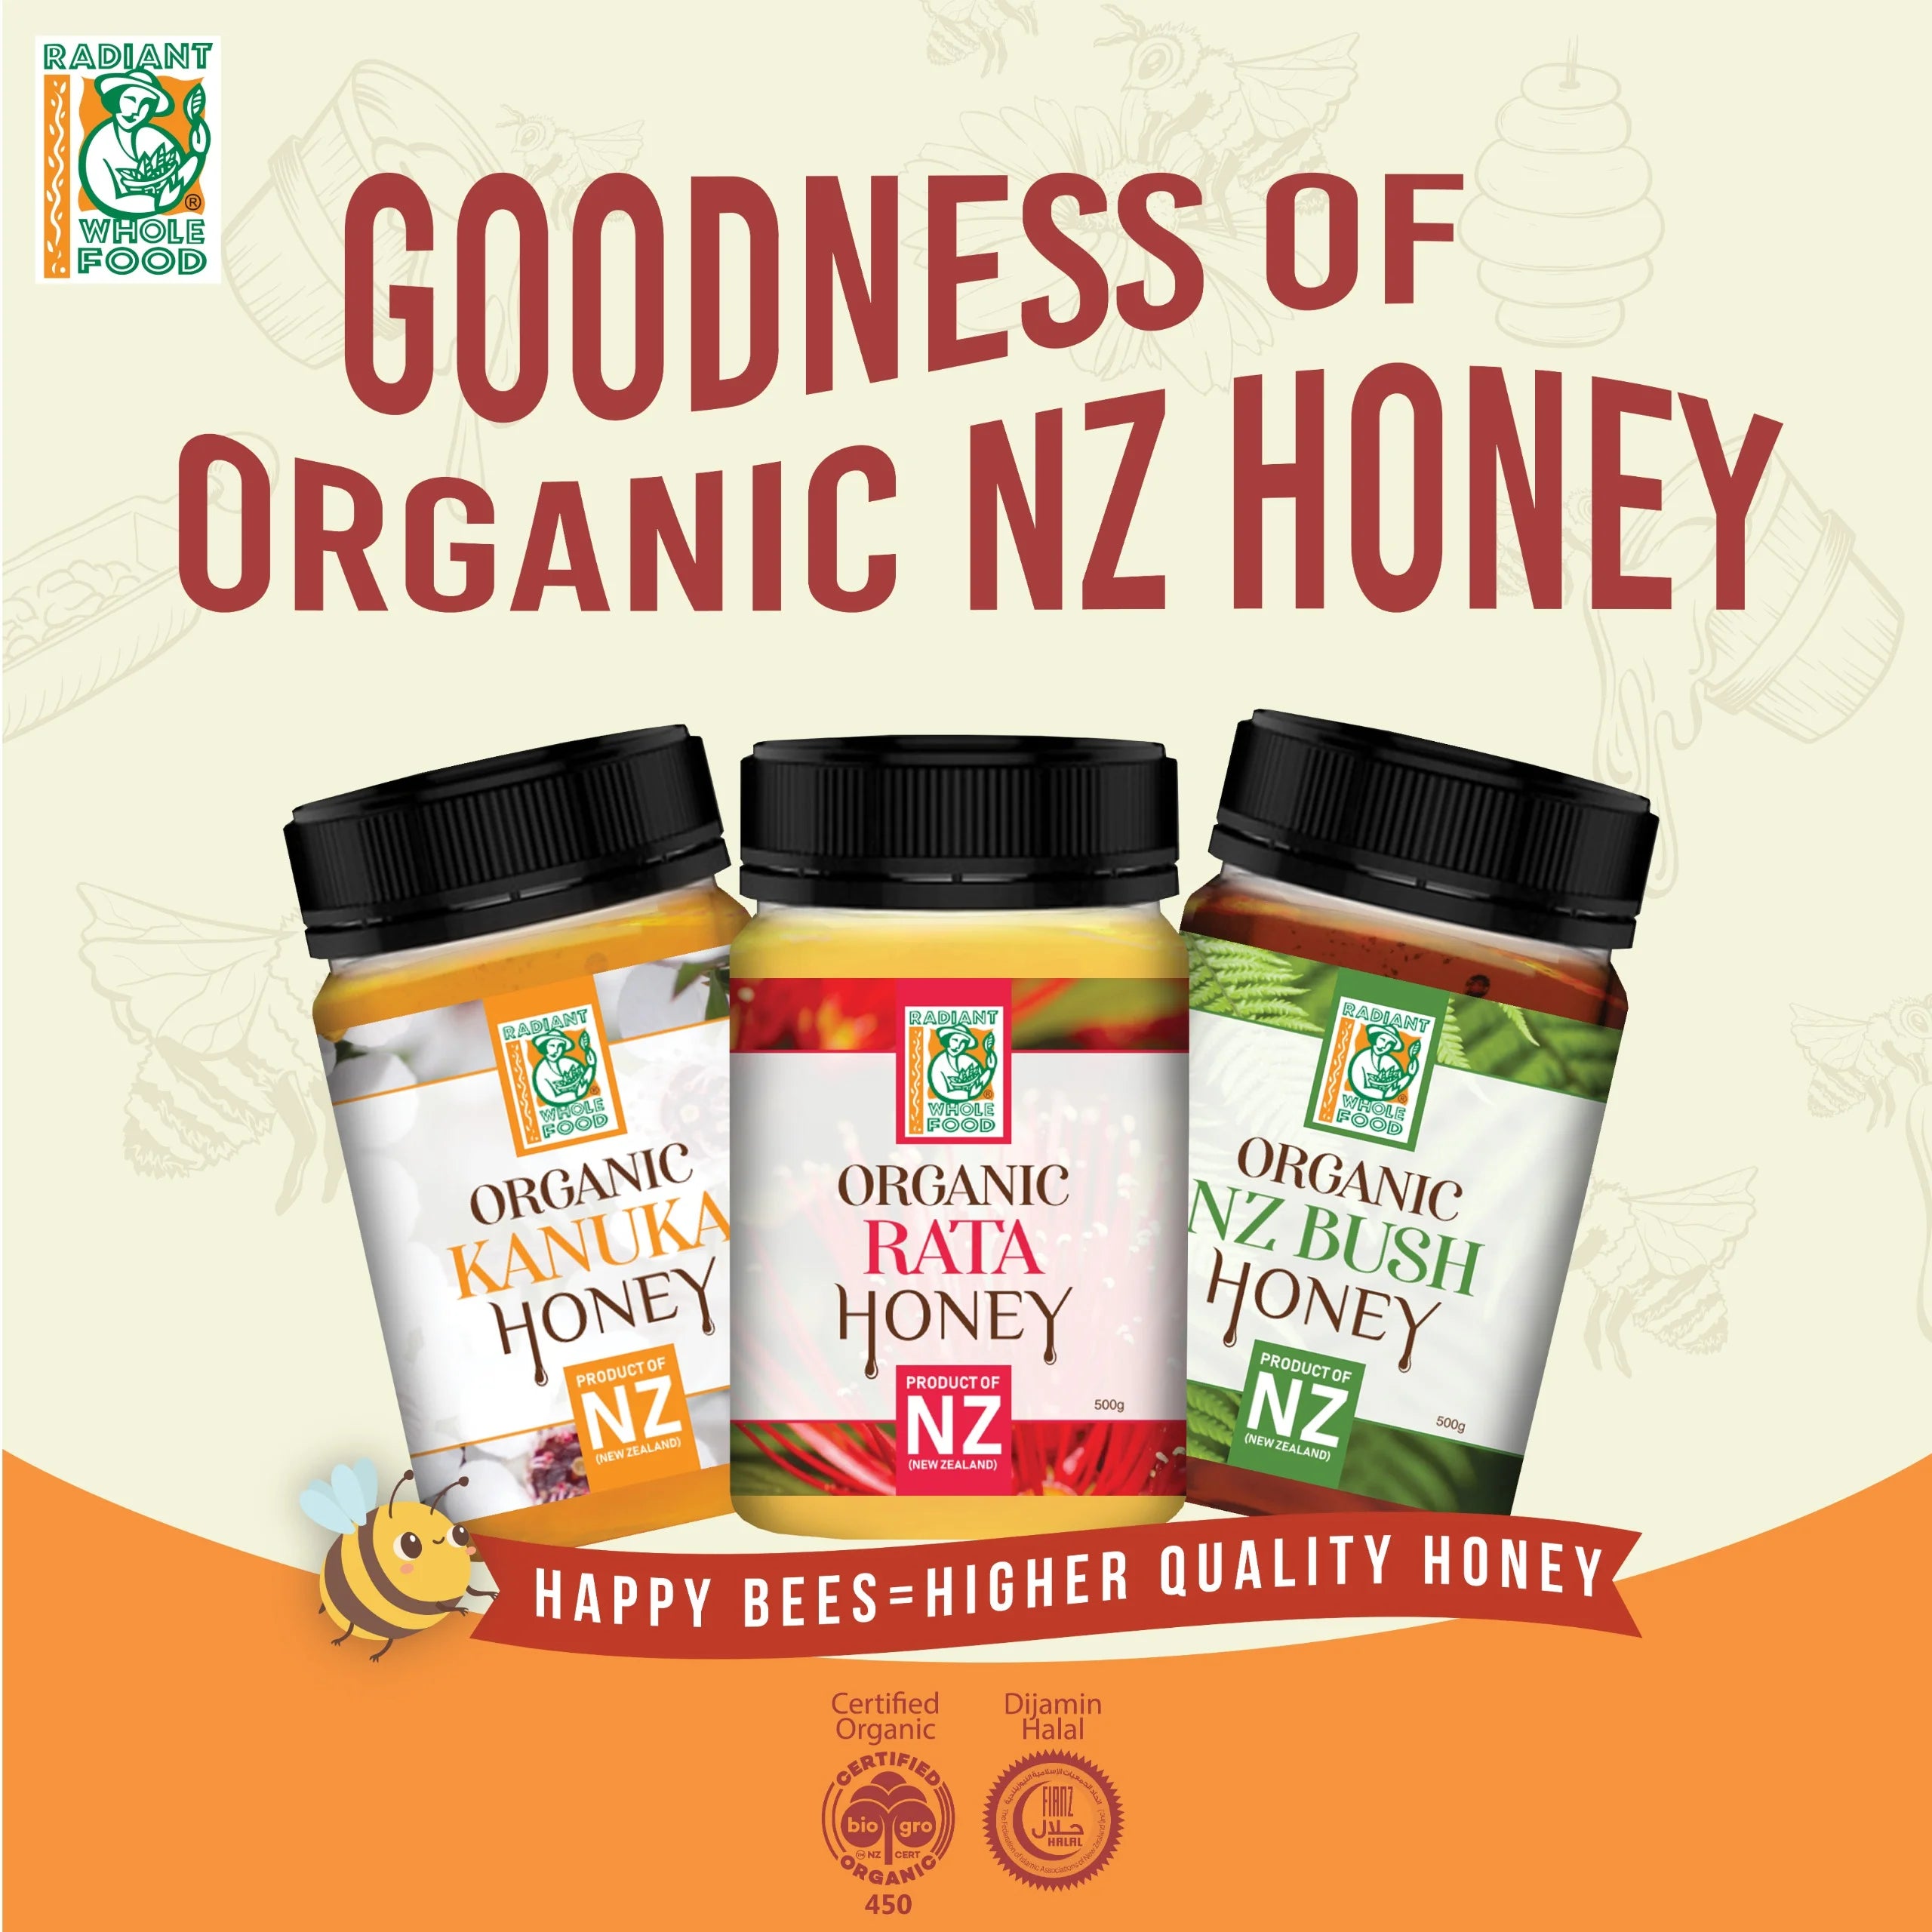 Organic NZ Honey Series — The first of its kind in Malaysia